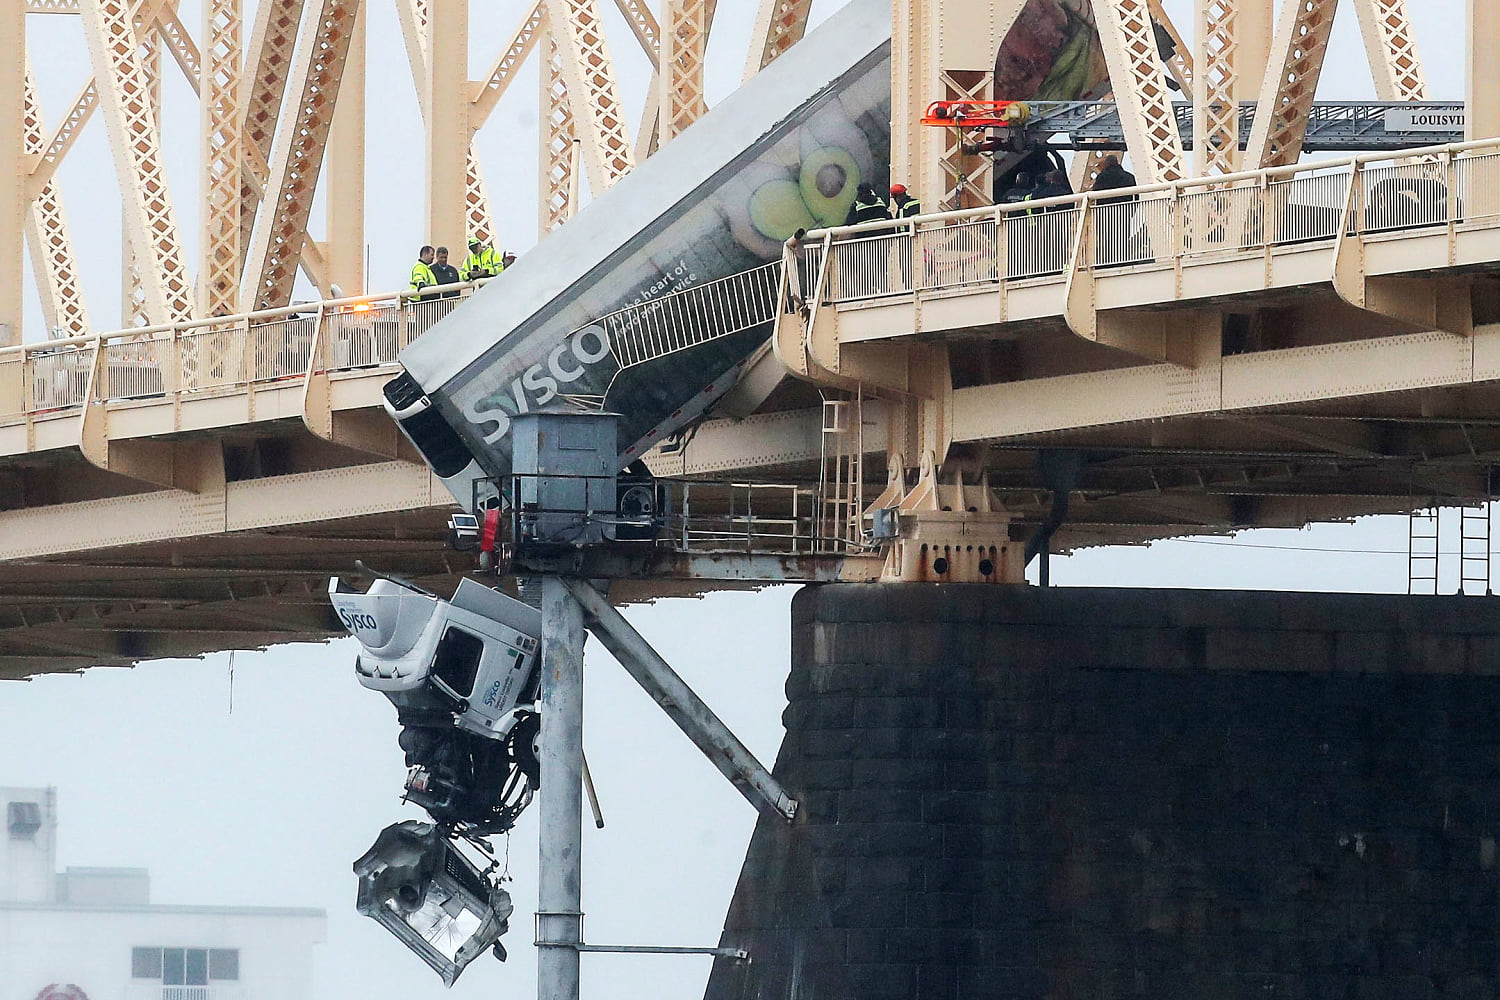 Truck driver pulled to safety after crash leaves vehicle dangling over bridge across Ohio River